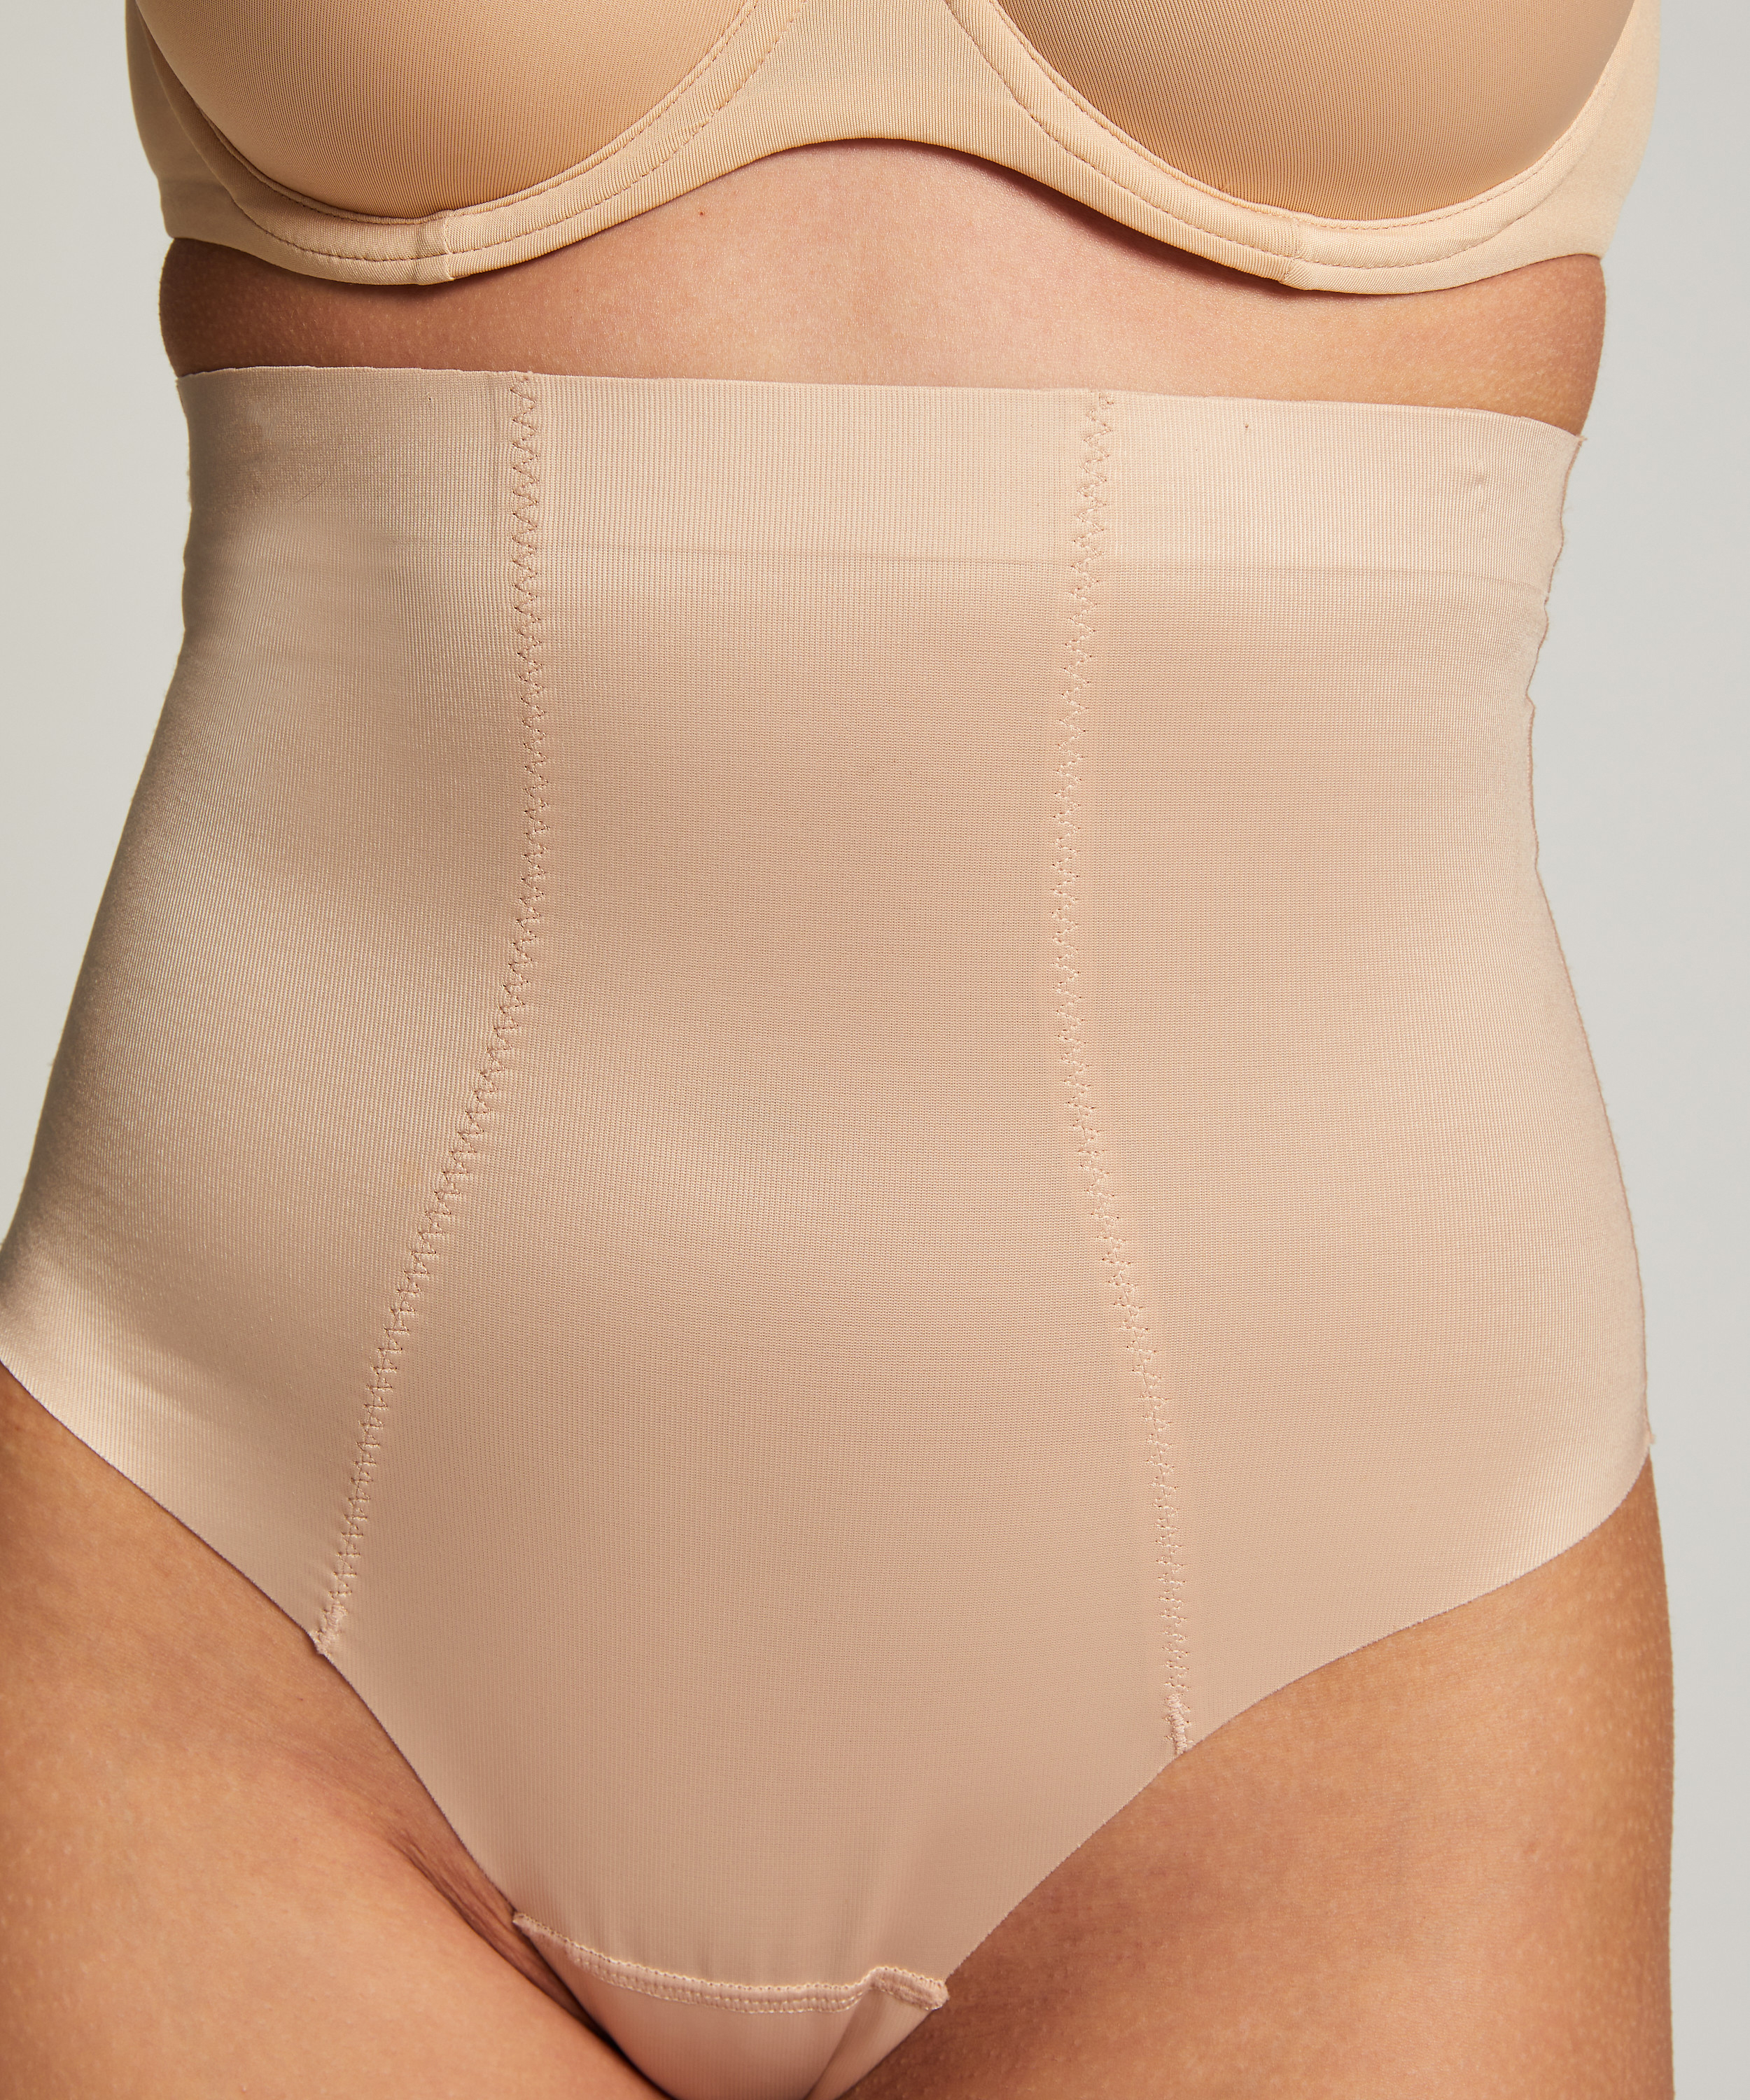 Formender Scuba-Tanga mit hoher Taille, Beige, main